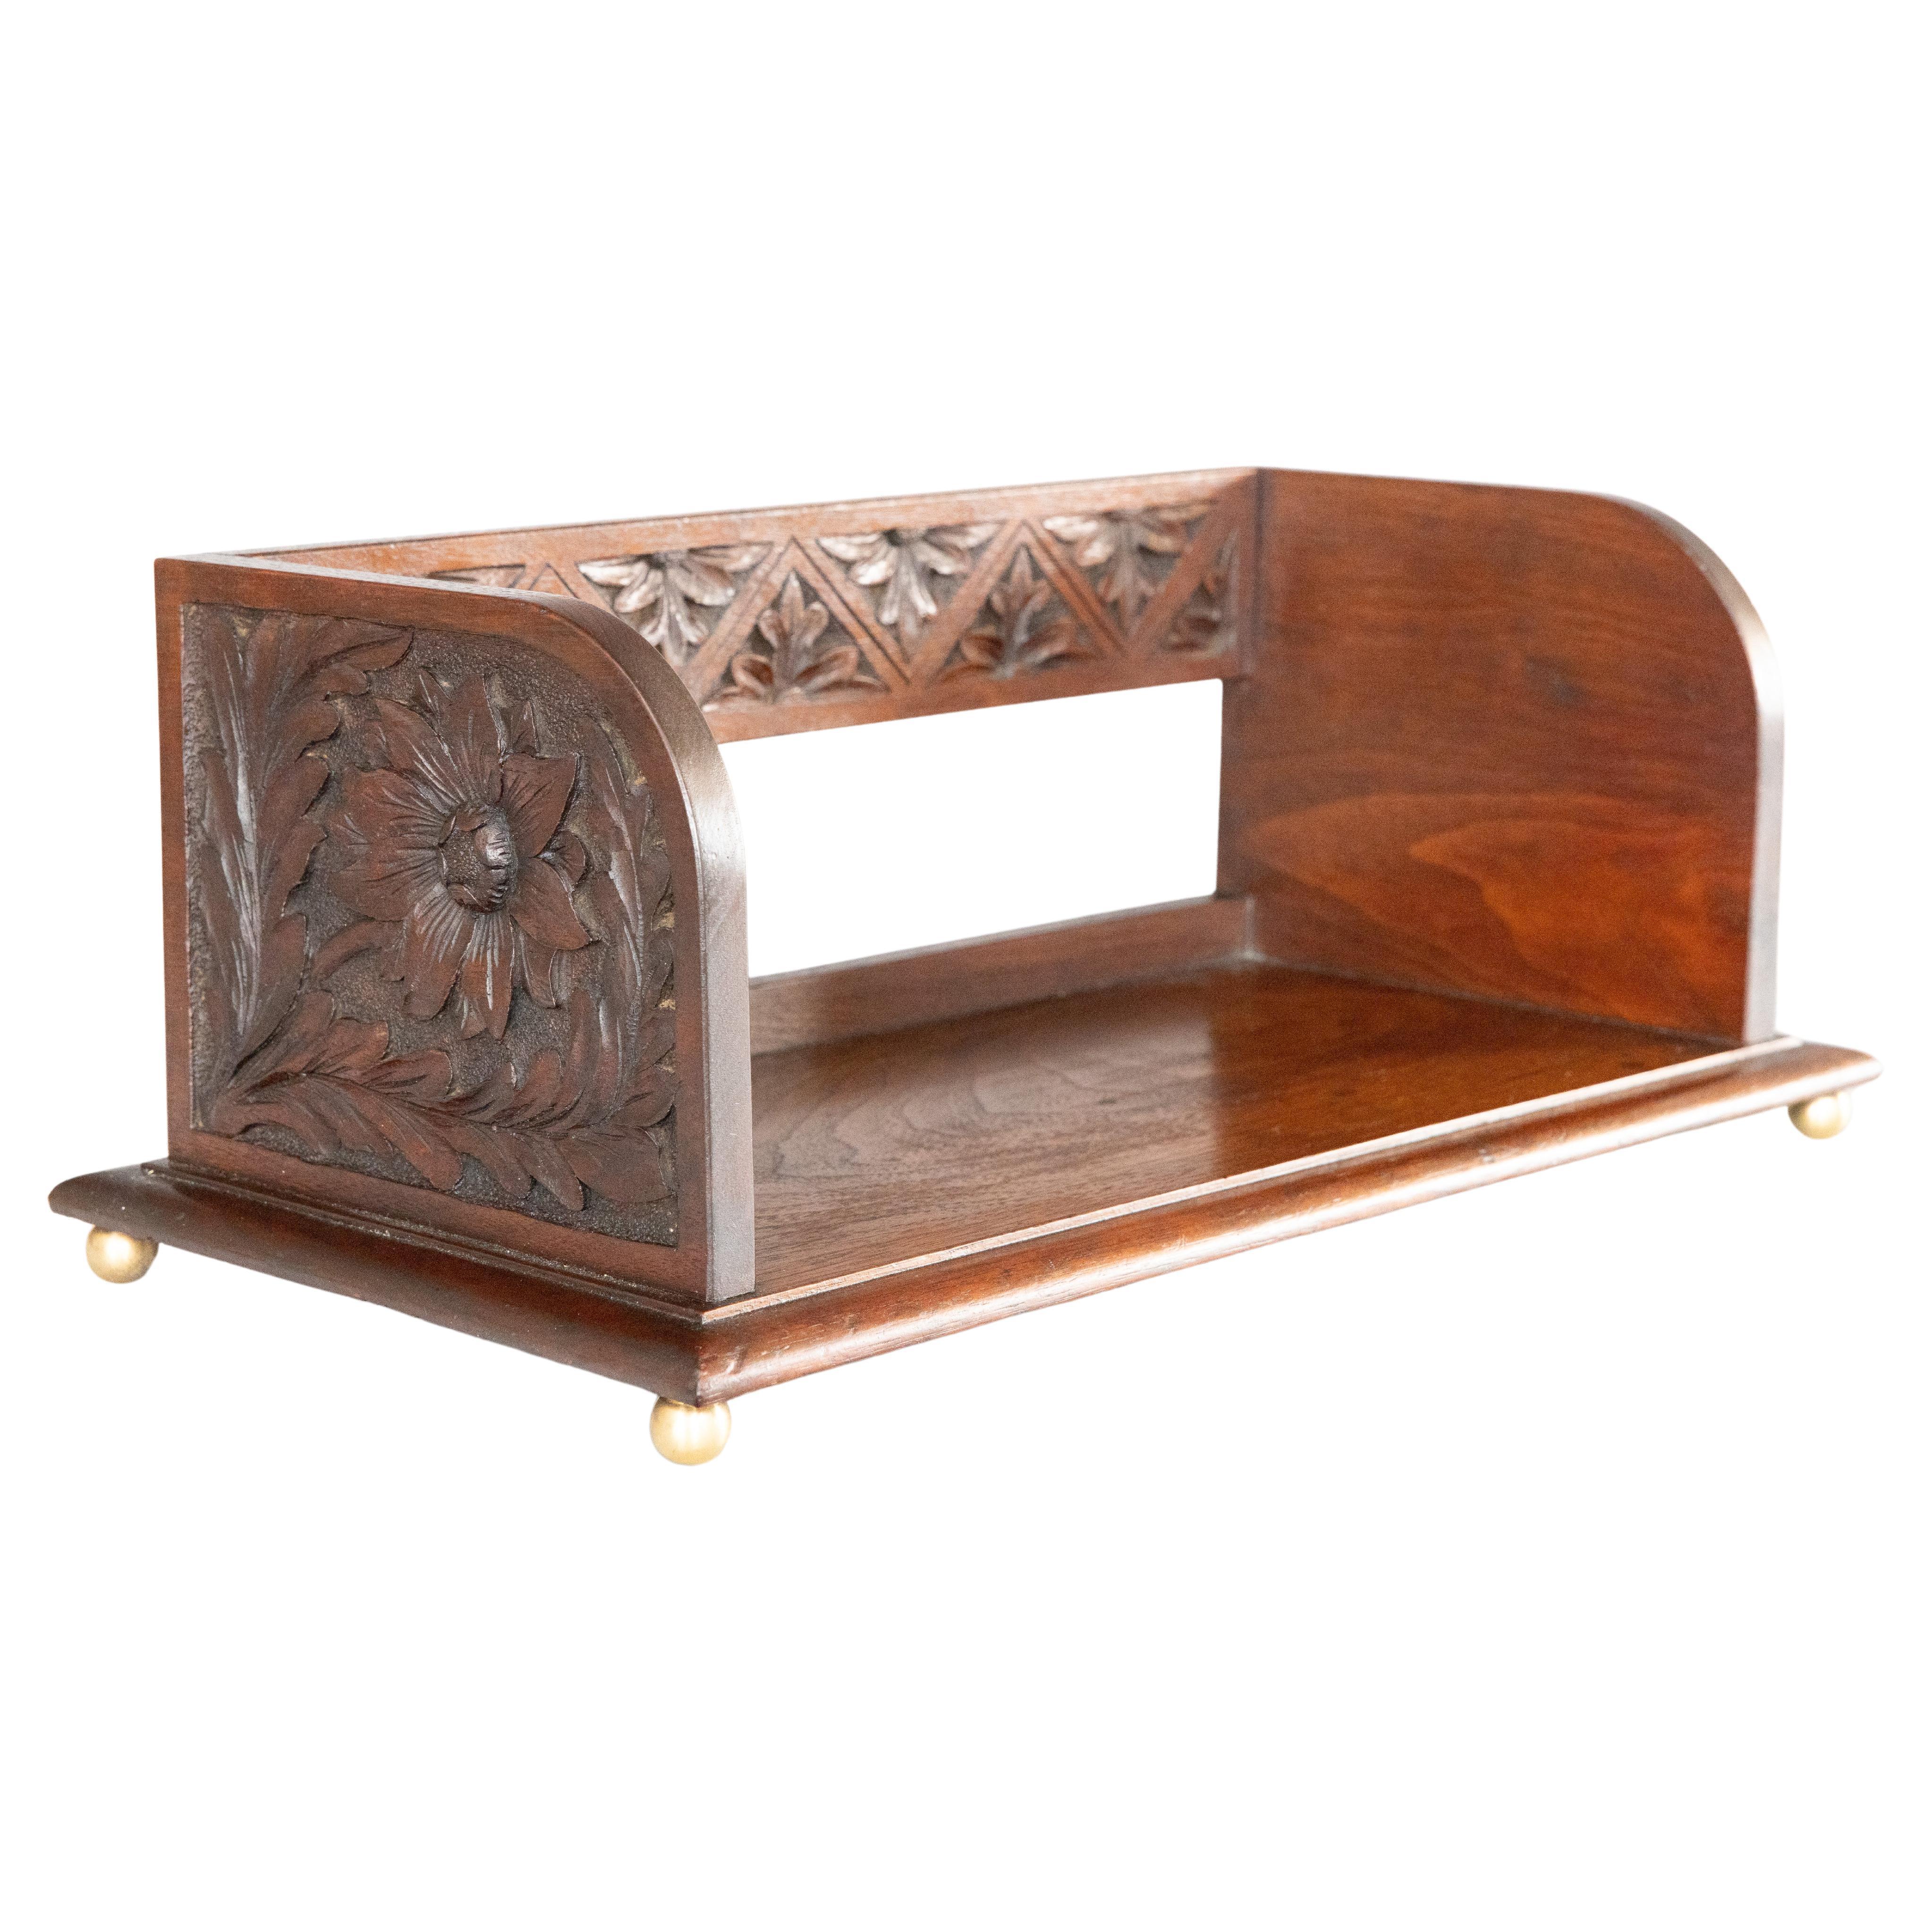 English Carved Mahogany Table Top Book Trough Rack Stand Bookends, C. 1900 For Sale